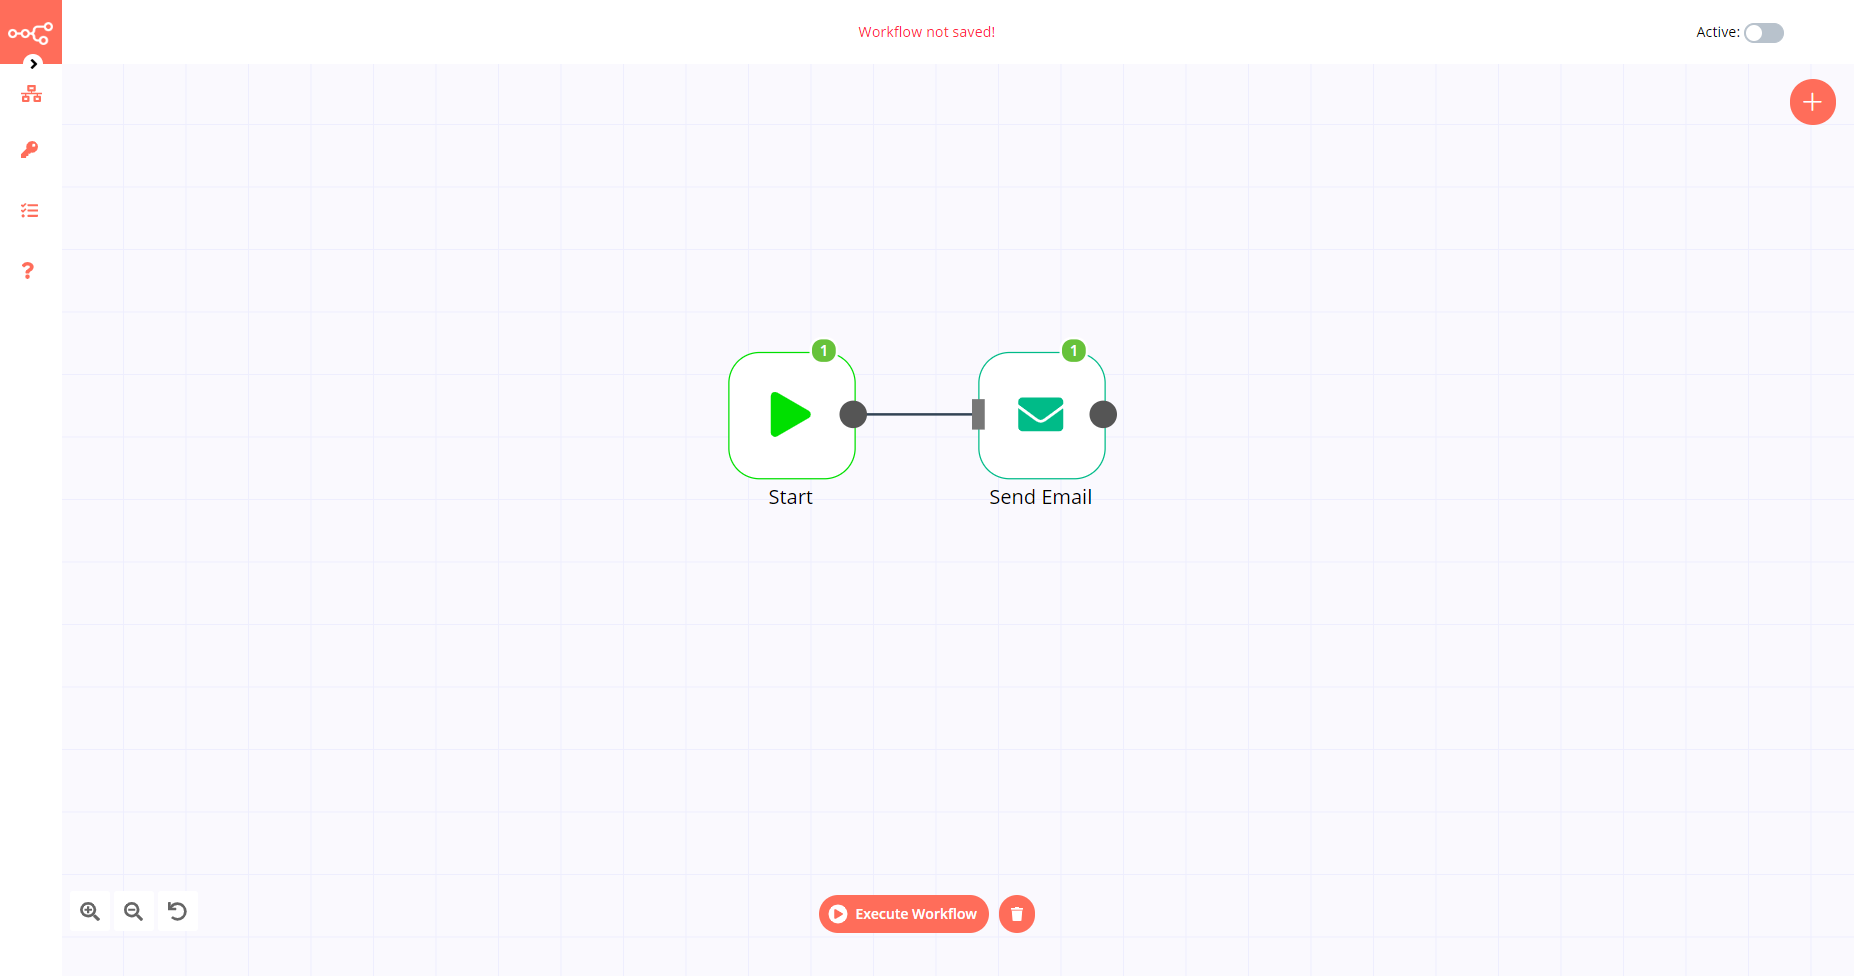 A workflow with the Send Email node